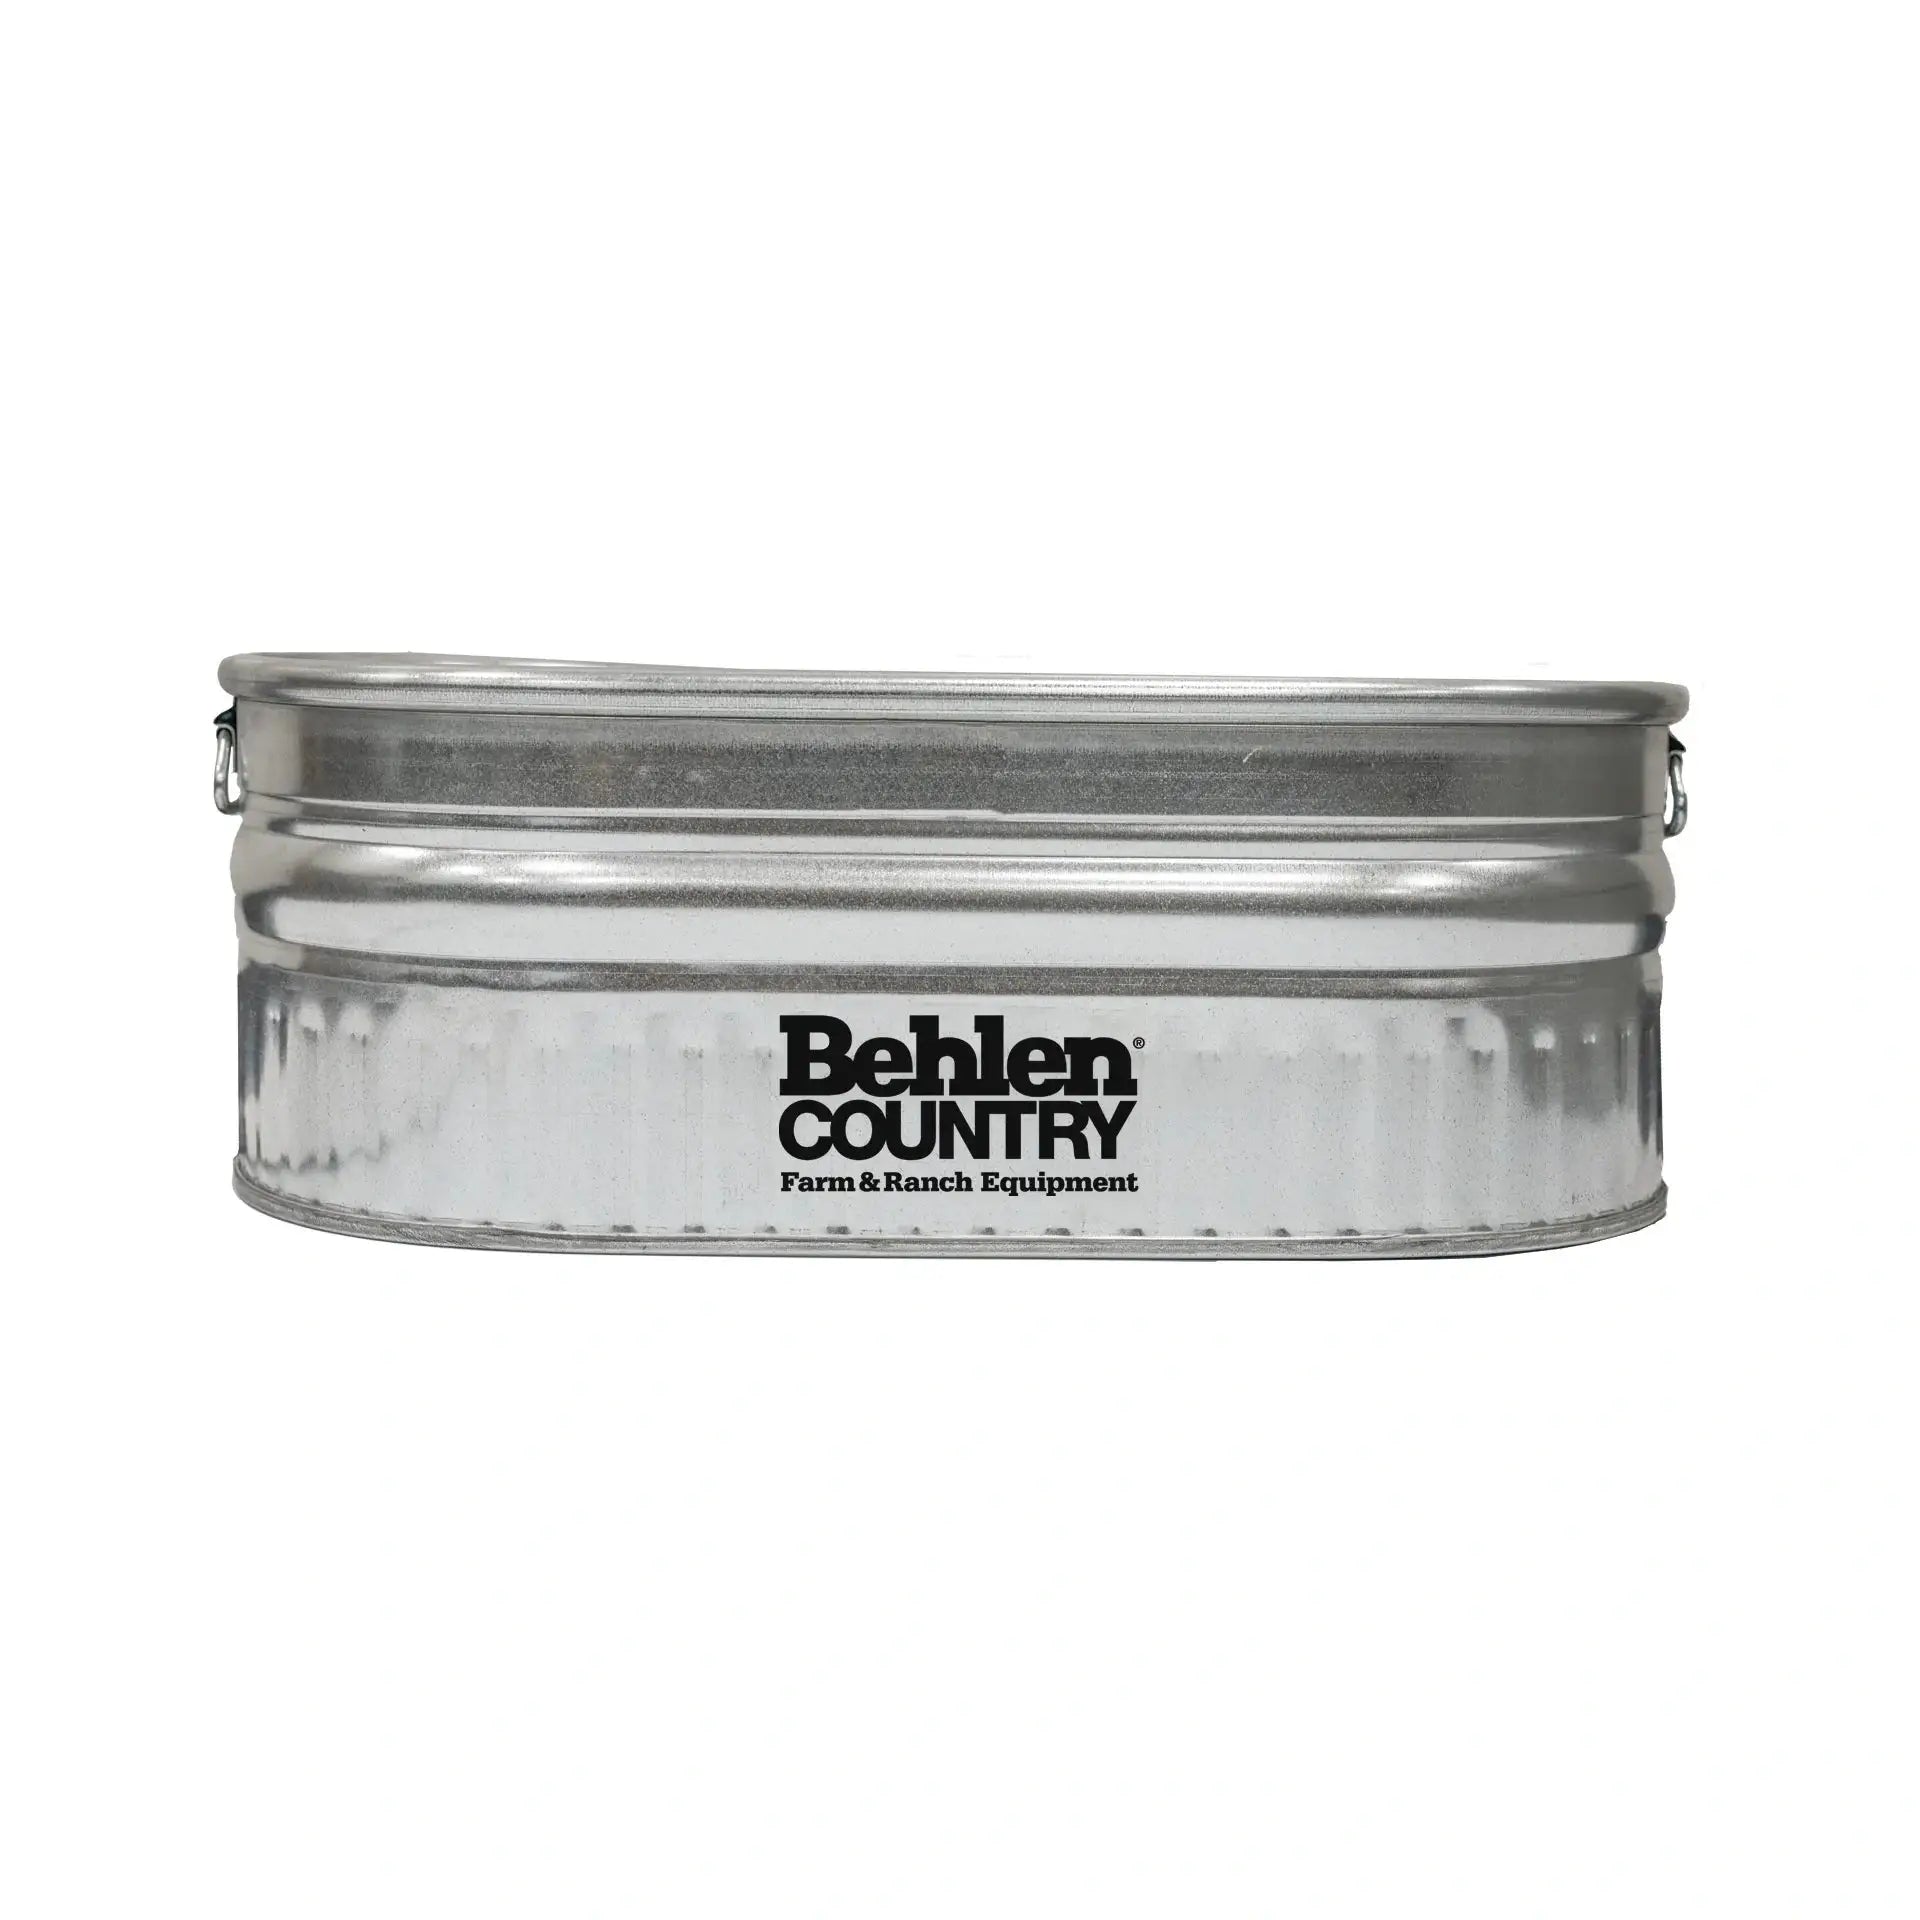 Behlen Country - Shallow Utility Tank with Handles (25 gal)